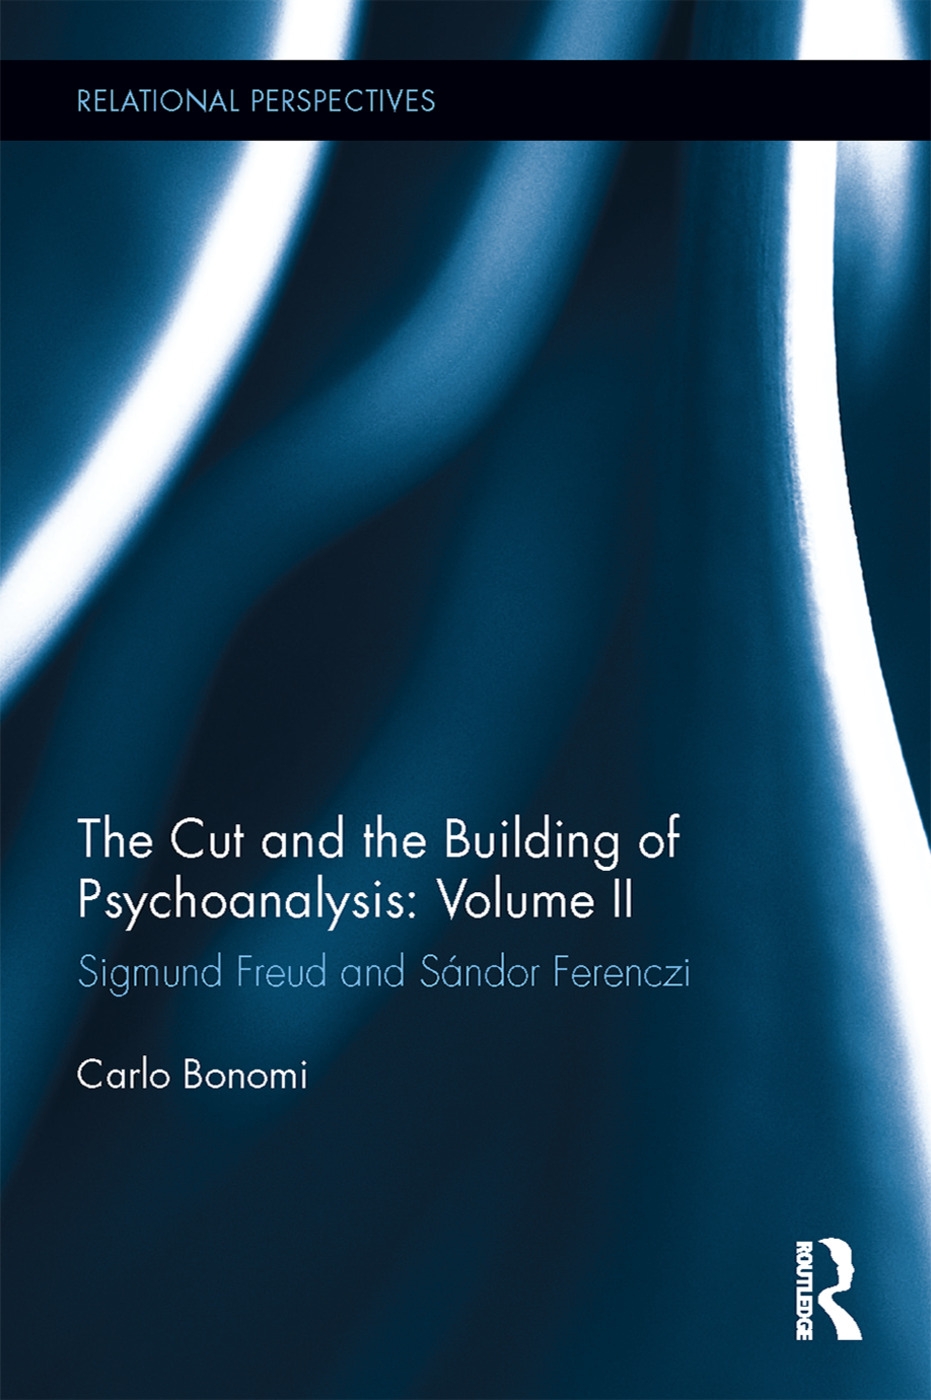 The Cut and the Building of Psychoanalysis: Sigmund Freud and Sandor Ferenczi